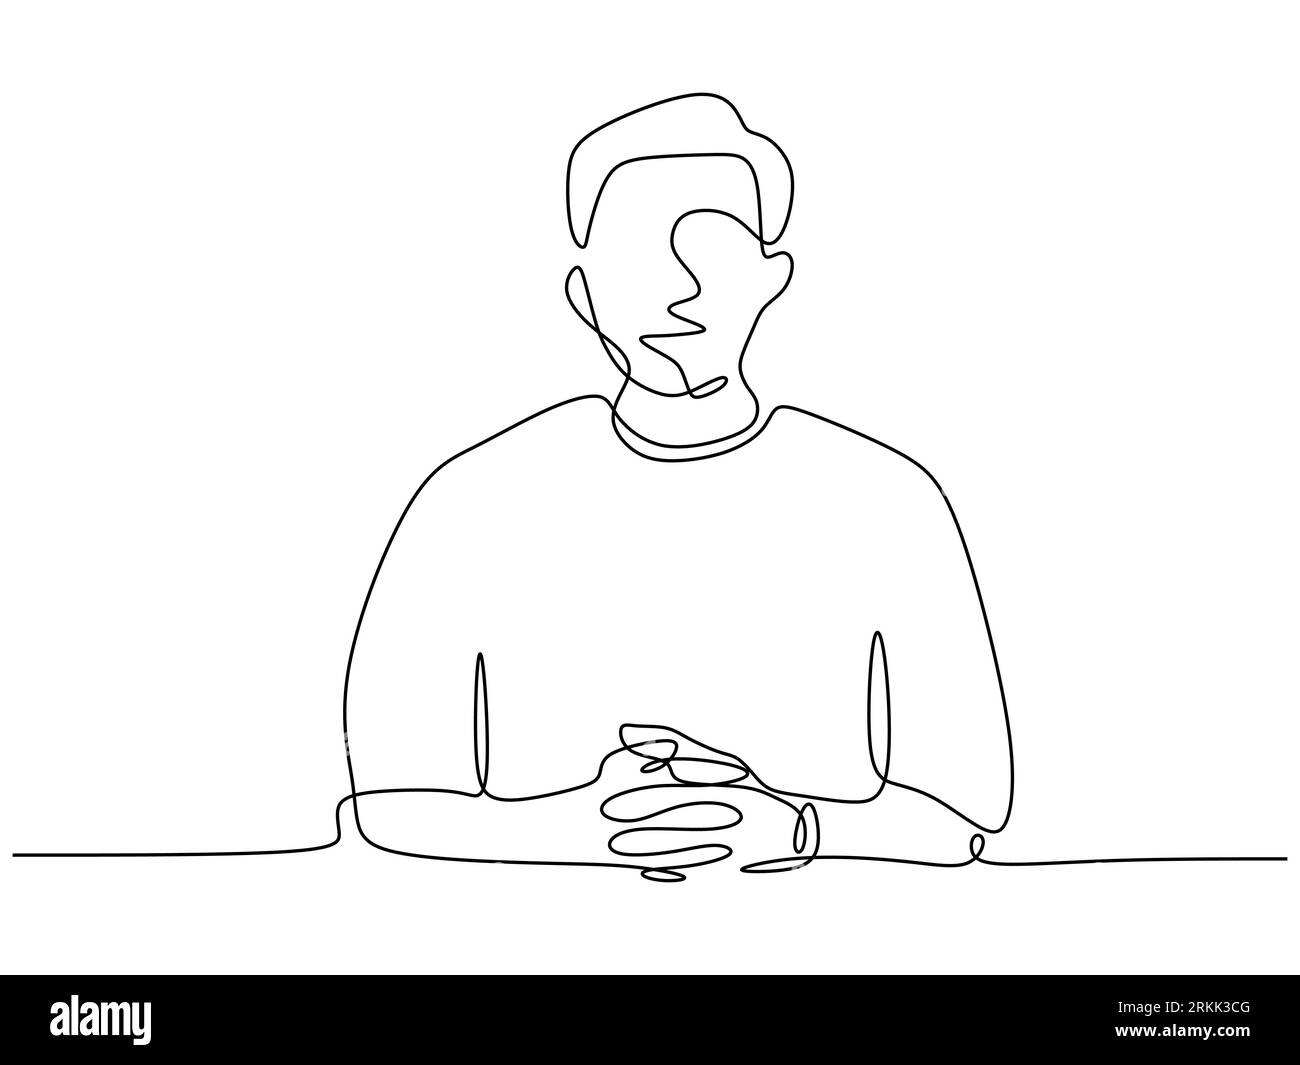 Line drawing person sitting down Cut Out Stock Images & Pictures